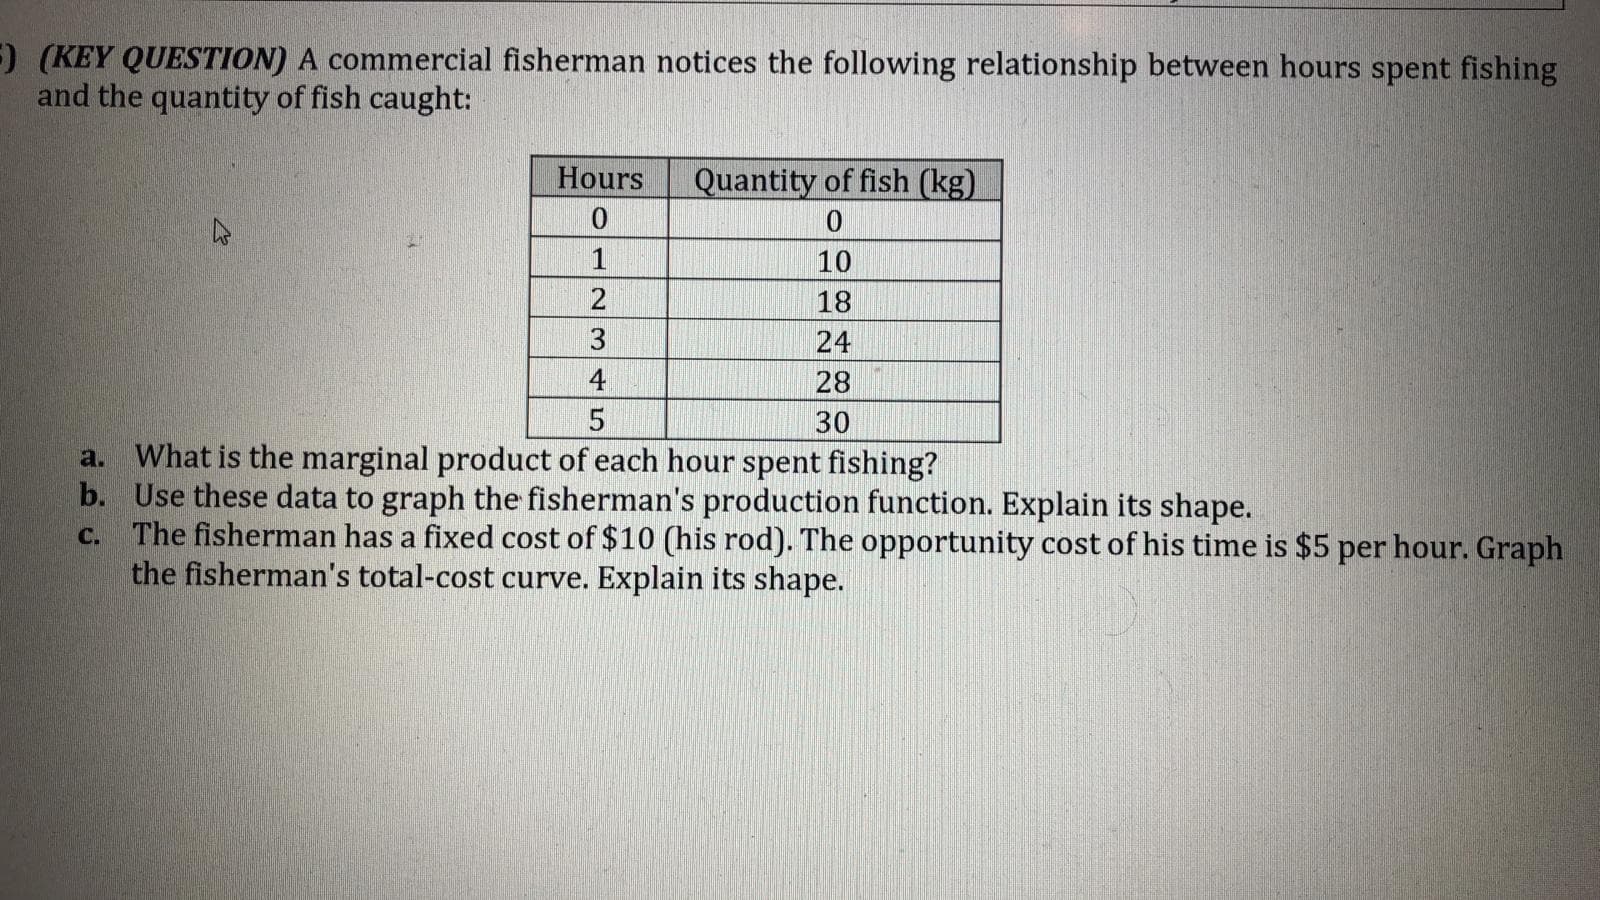 (KEY QUESTION) A commercial fisherman notices the following relationship between hours spent fishing
and the quantity of fish caught:
Hours
Quantity of fish (kg)
10
18
3
24
4
28
30
a. What is the marginal product of each hour spent fishing?
b. Use these data to graph the fisherman's production function. Explain its shape.
C. The fisherman has a fixed cost of $10 (his rod). The opportunity cost of his time is $5 per hour. Graph
the fisherman's total-cost curve. Explain its shape.
